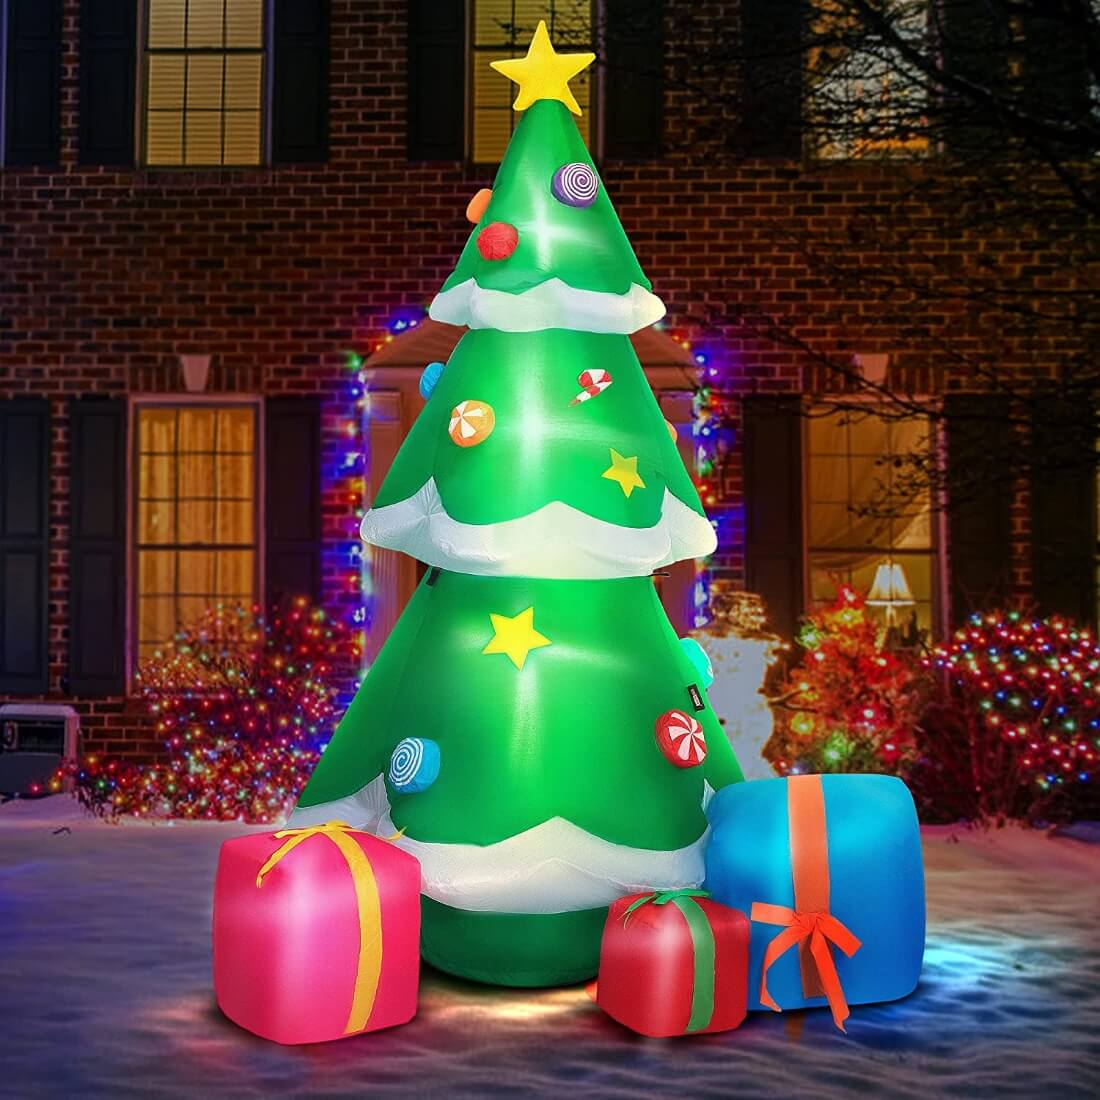  VIVOHOME 6ft Height Inflatable LED Lighted Christmas Tree with 3 Gift Boxes Candy Cane Stars and Ornaments